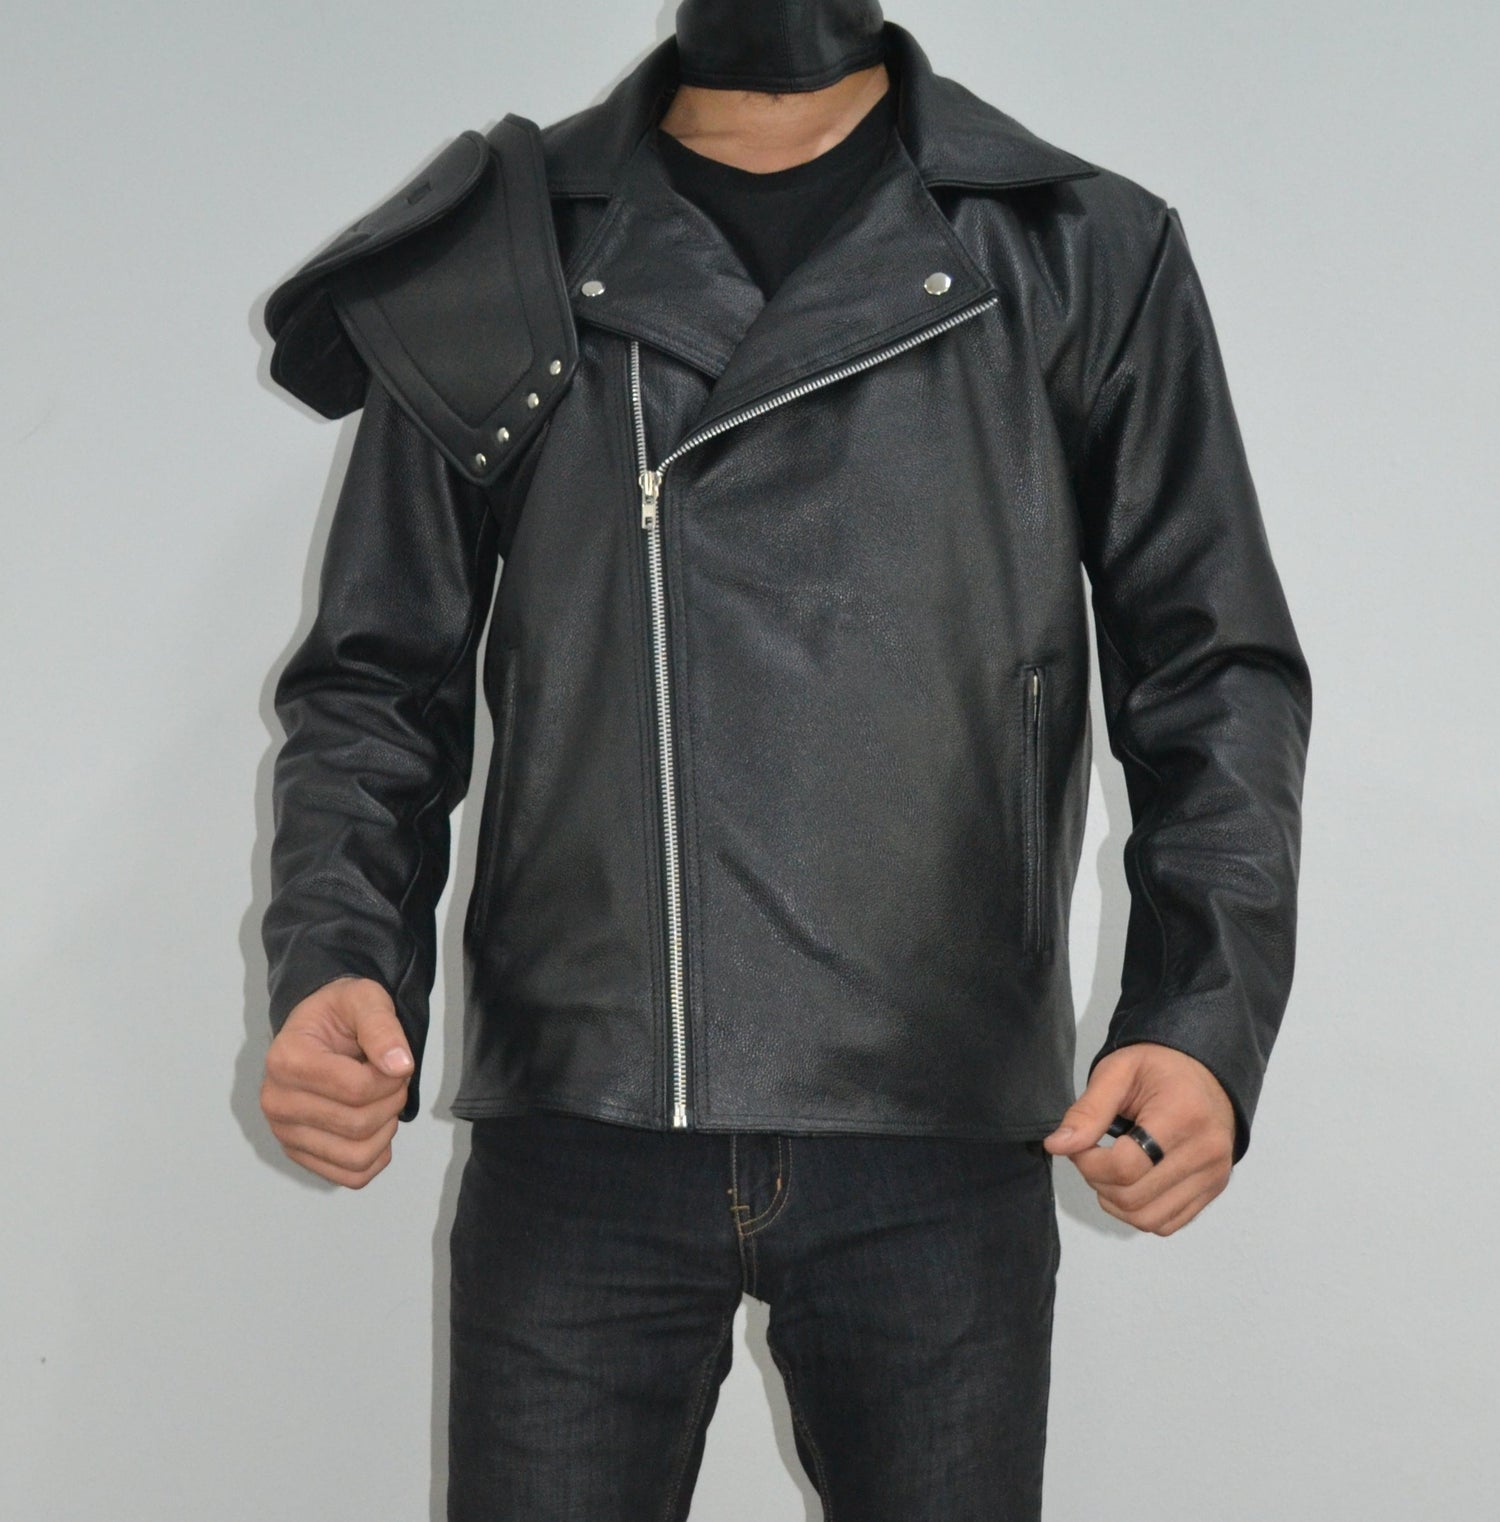 Black Leather Jacket worn by Max (mel Gibson) as seen in Mad Max 2 | Spotern